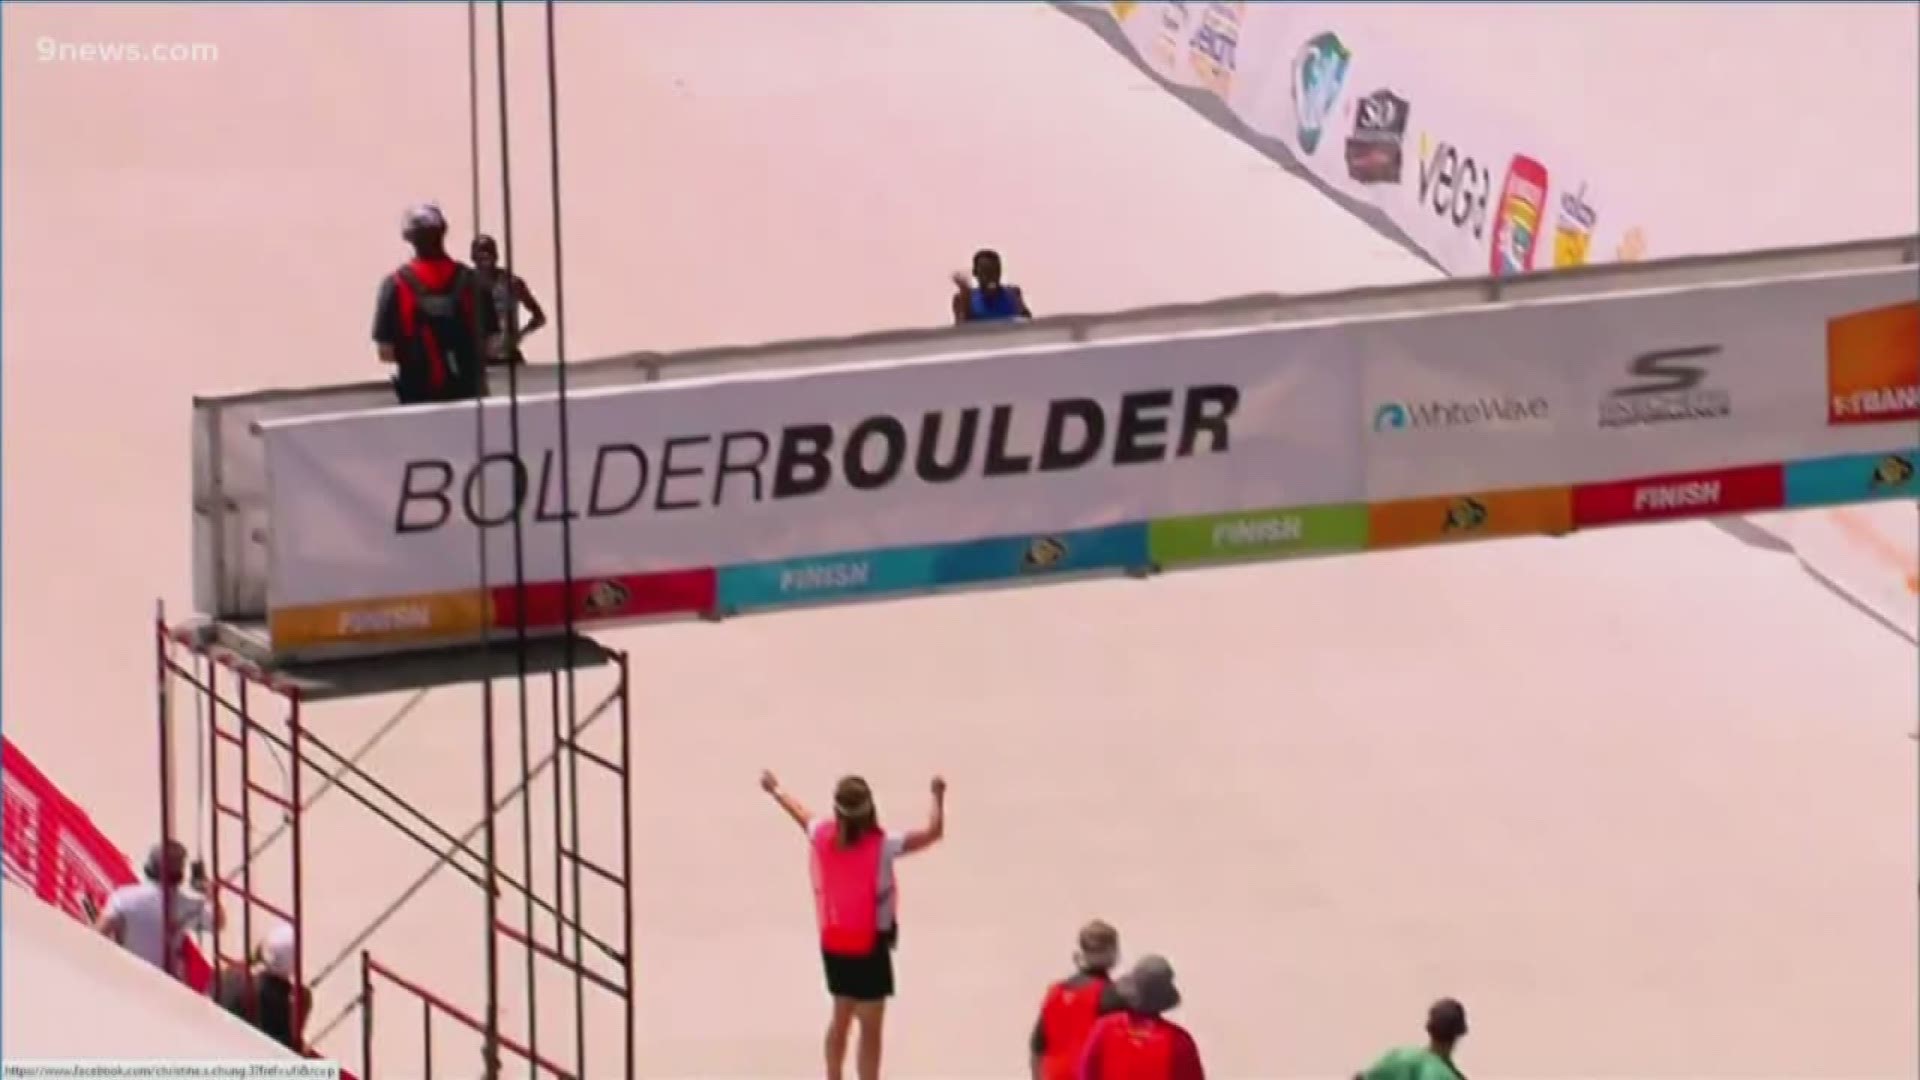 While the weather is a concern for the Bolder Boulder, the race's organizer tells 9NEWS about how the popular race is still a family affair.